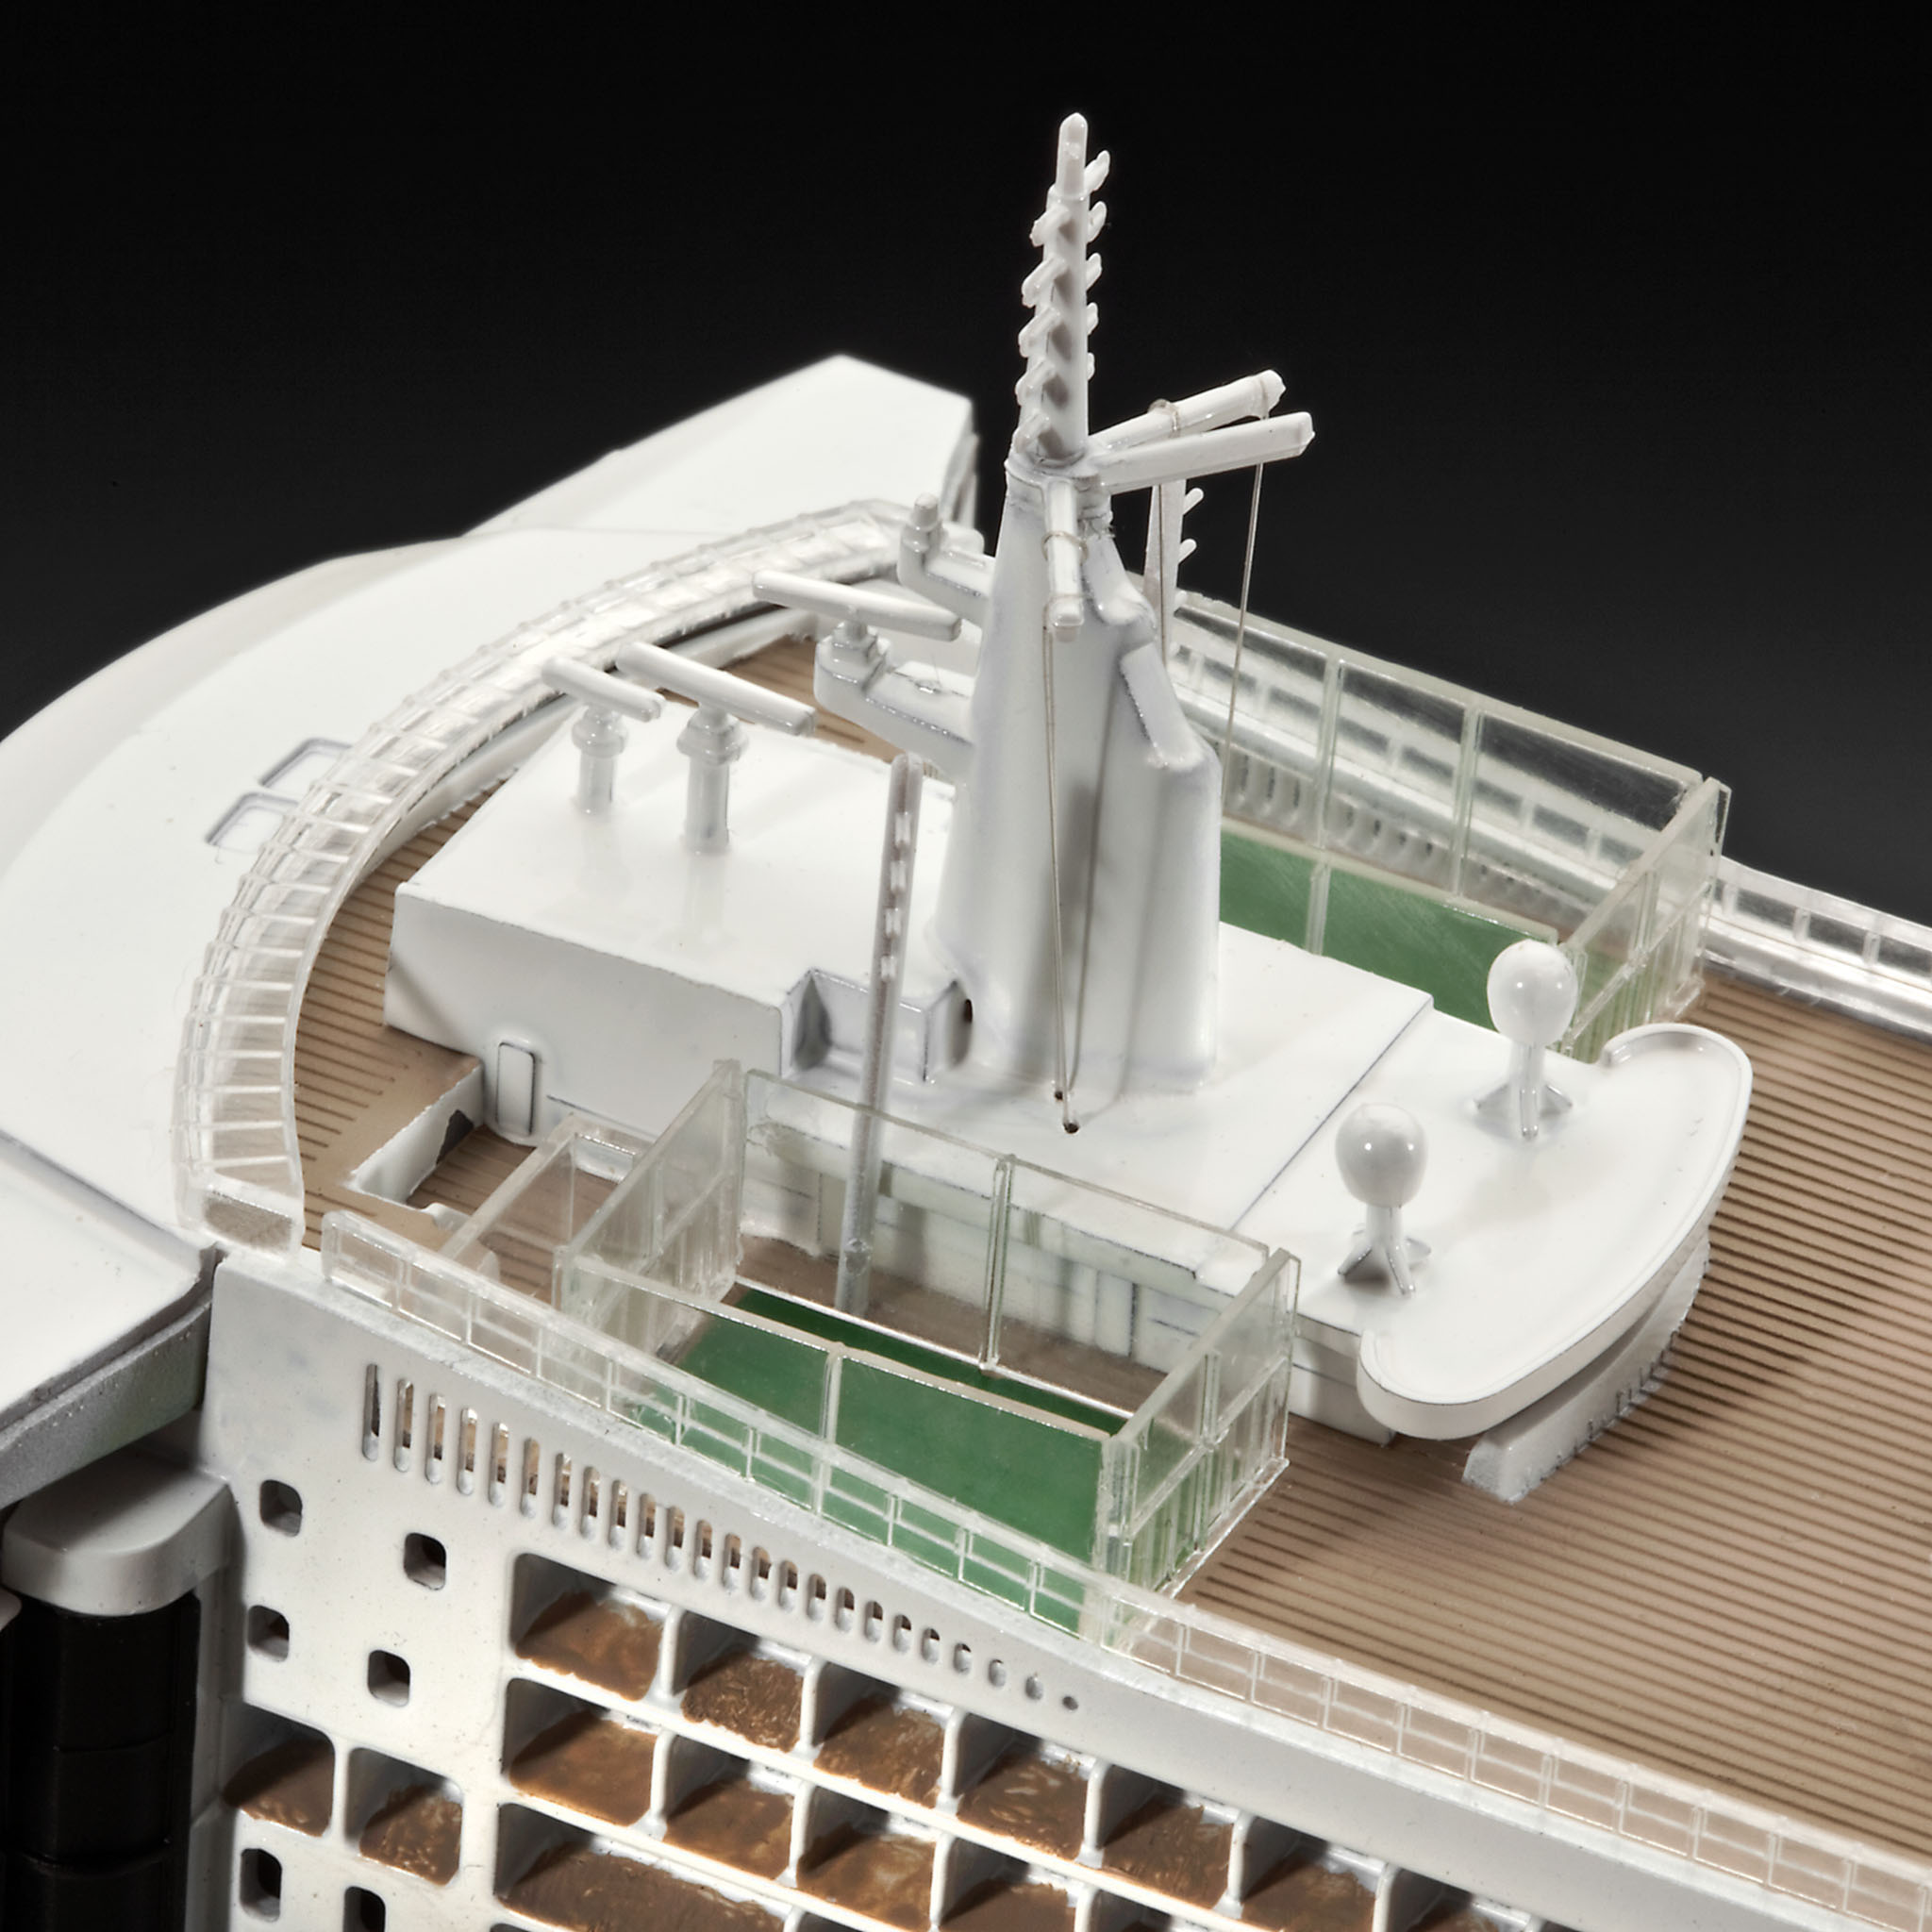 1:700 Queen Mary 2 